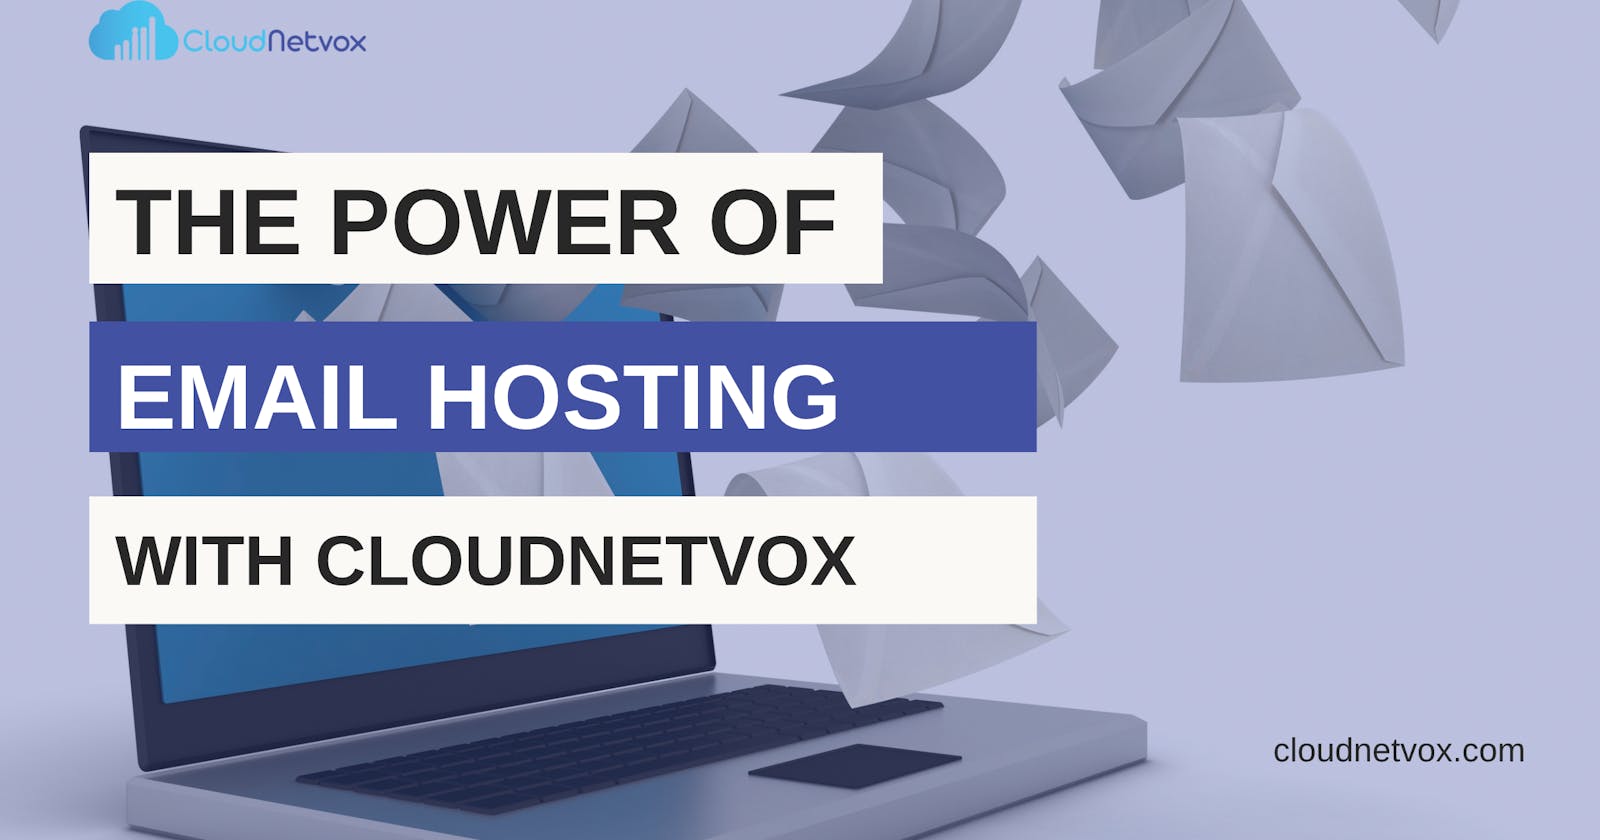 The Power of Email Hosting with Cloudnetvox.